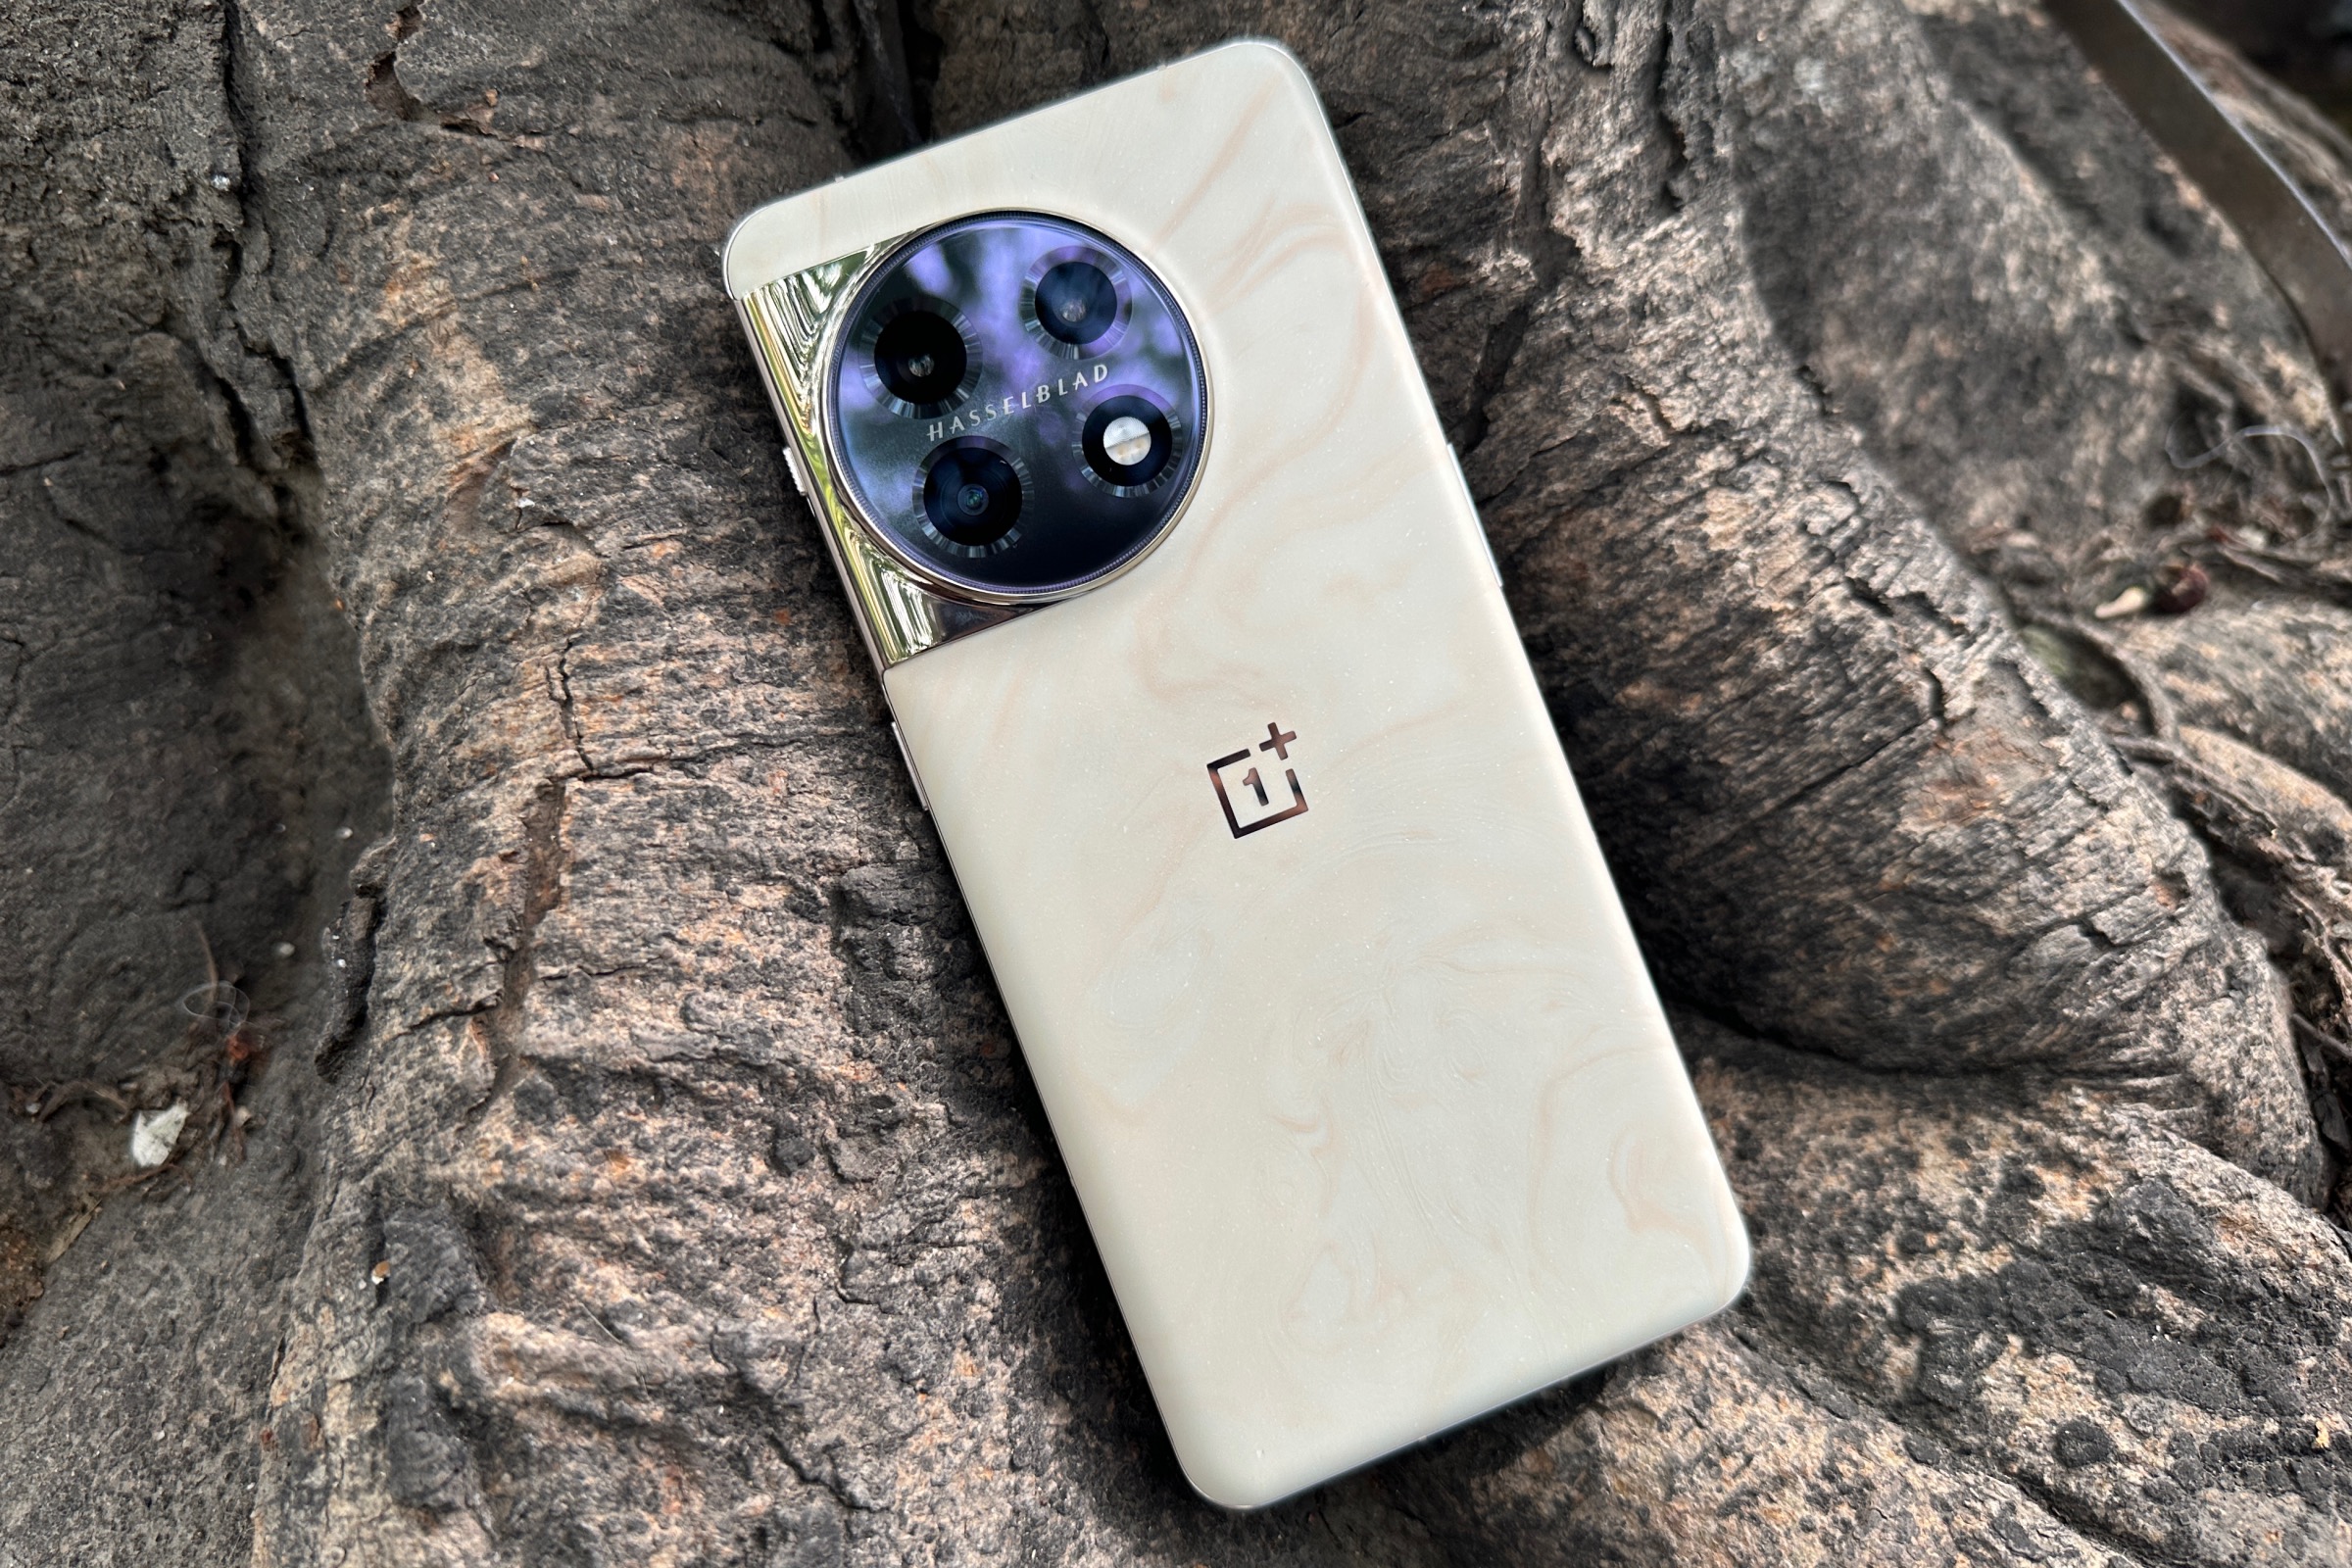 OnePlus told me the secrets behind the OnePlus 12's cool design